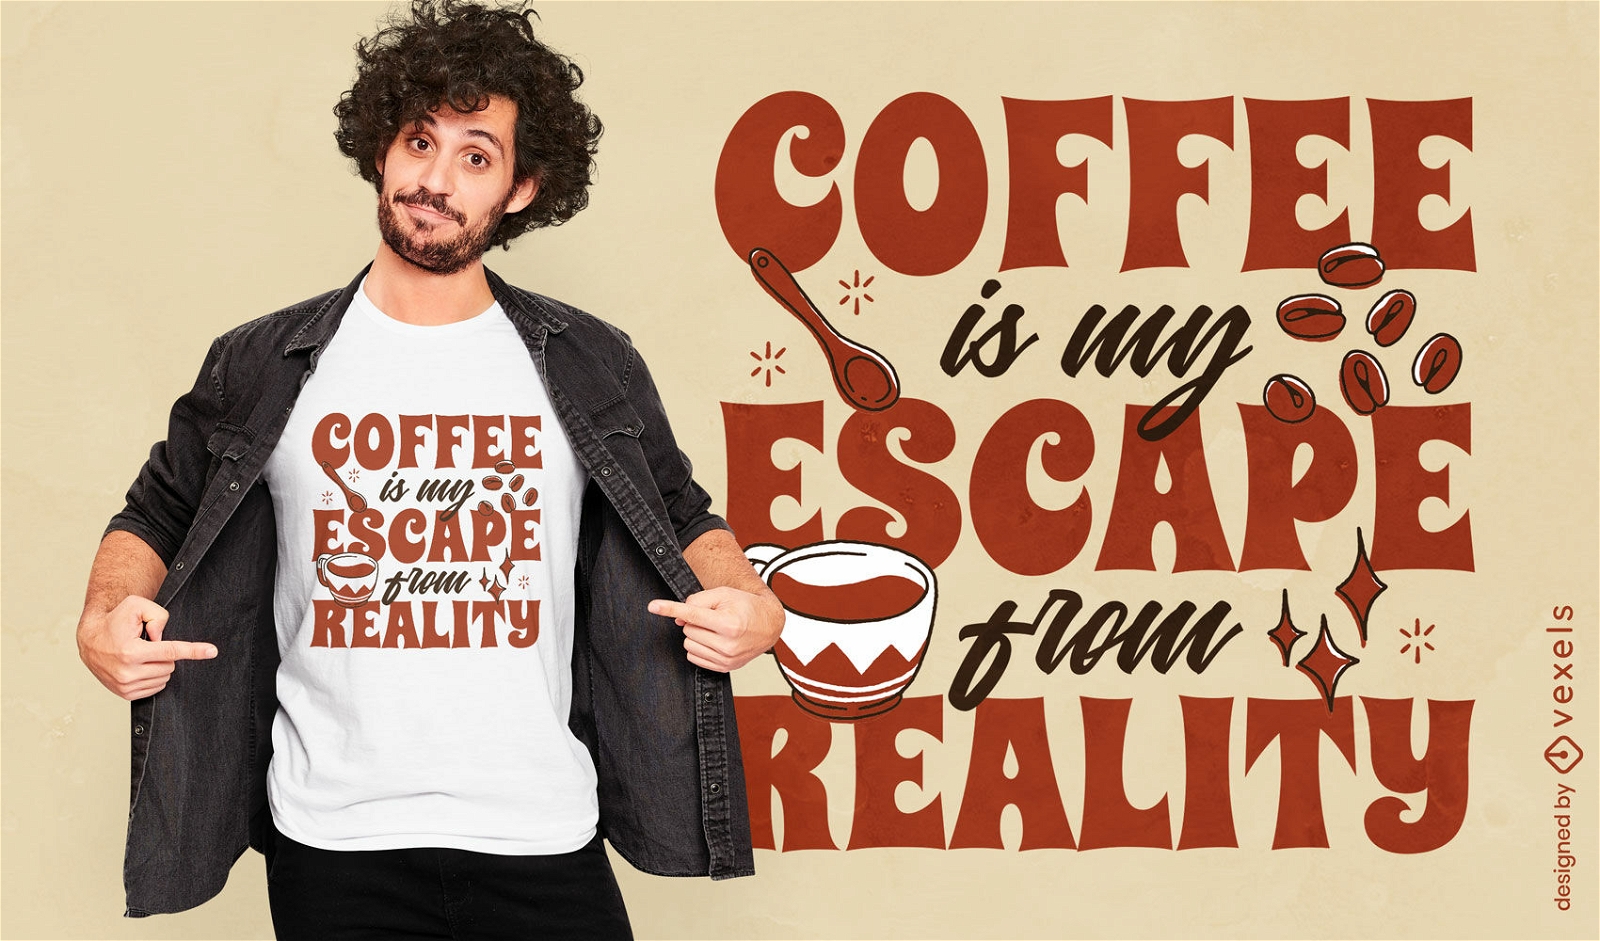 Coffee escape from reality quote t-shirt design